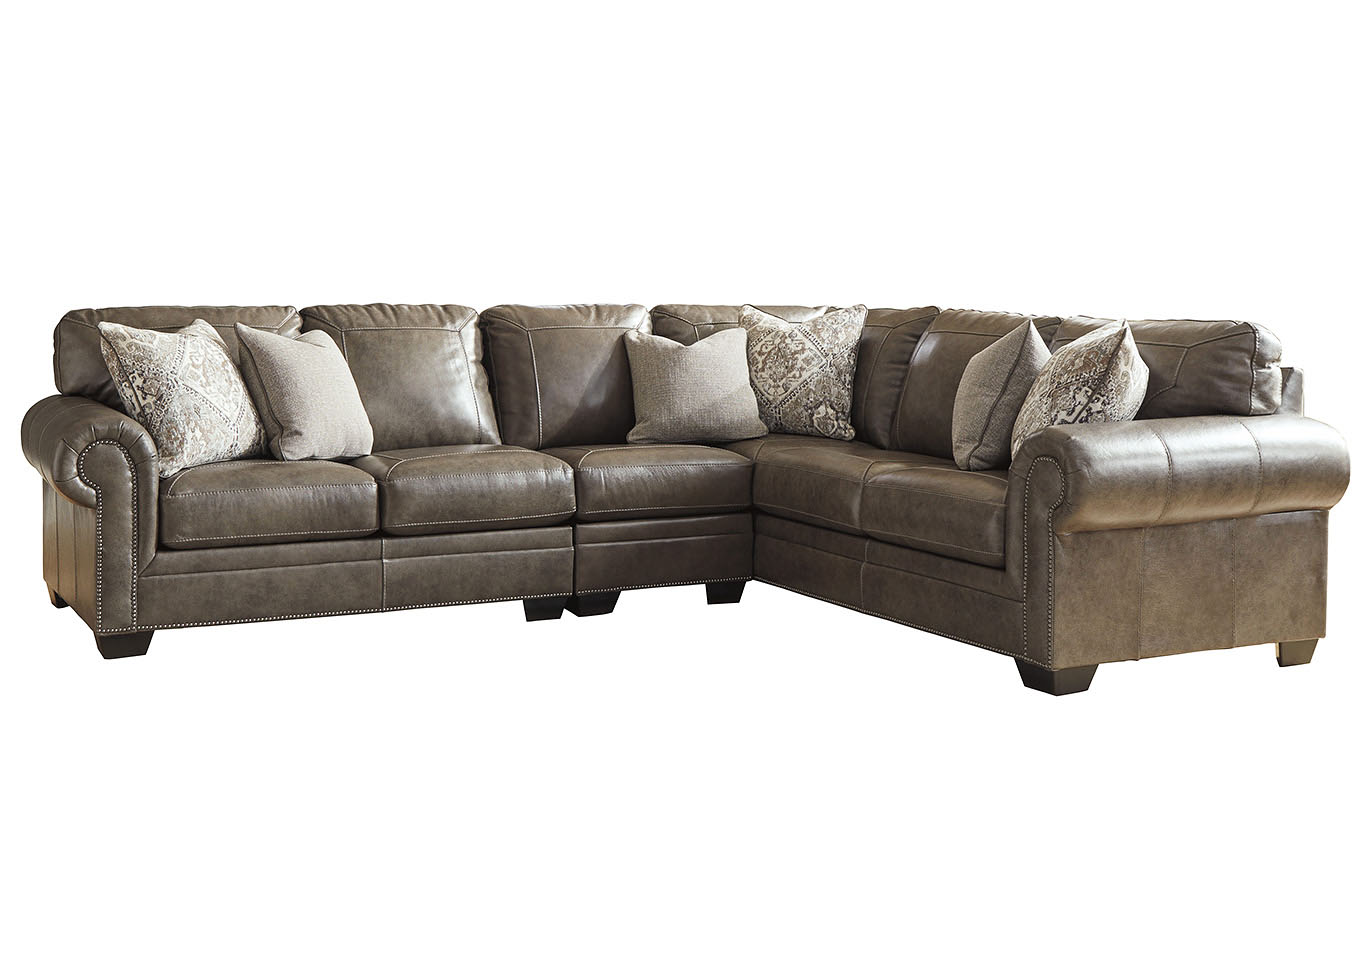 Roleson Quarry LAF Chaise Sectional,Signature Design By Ashley